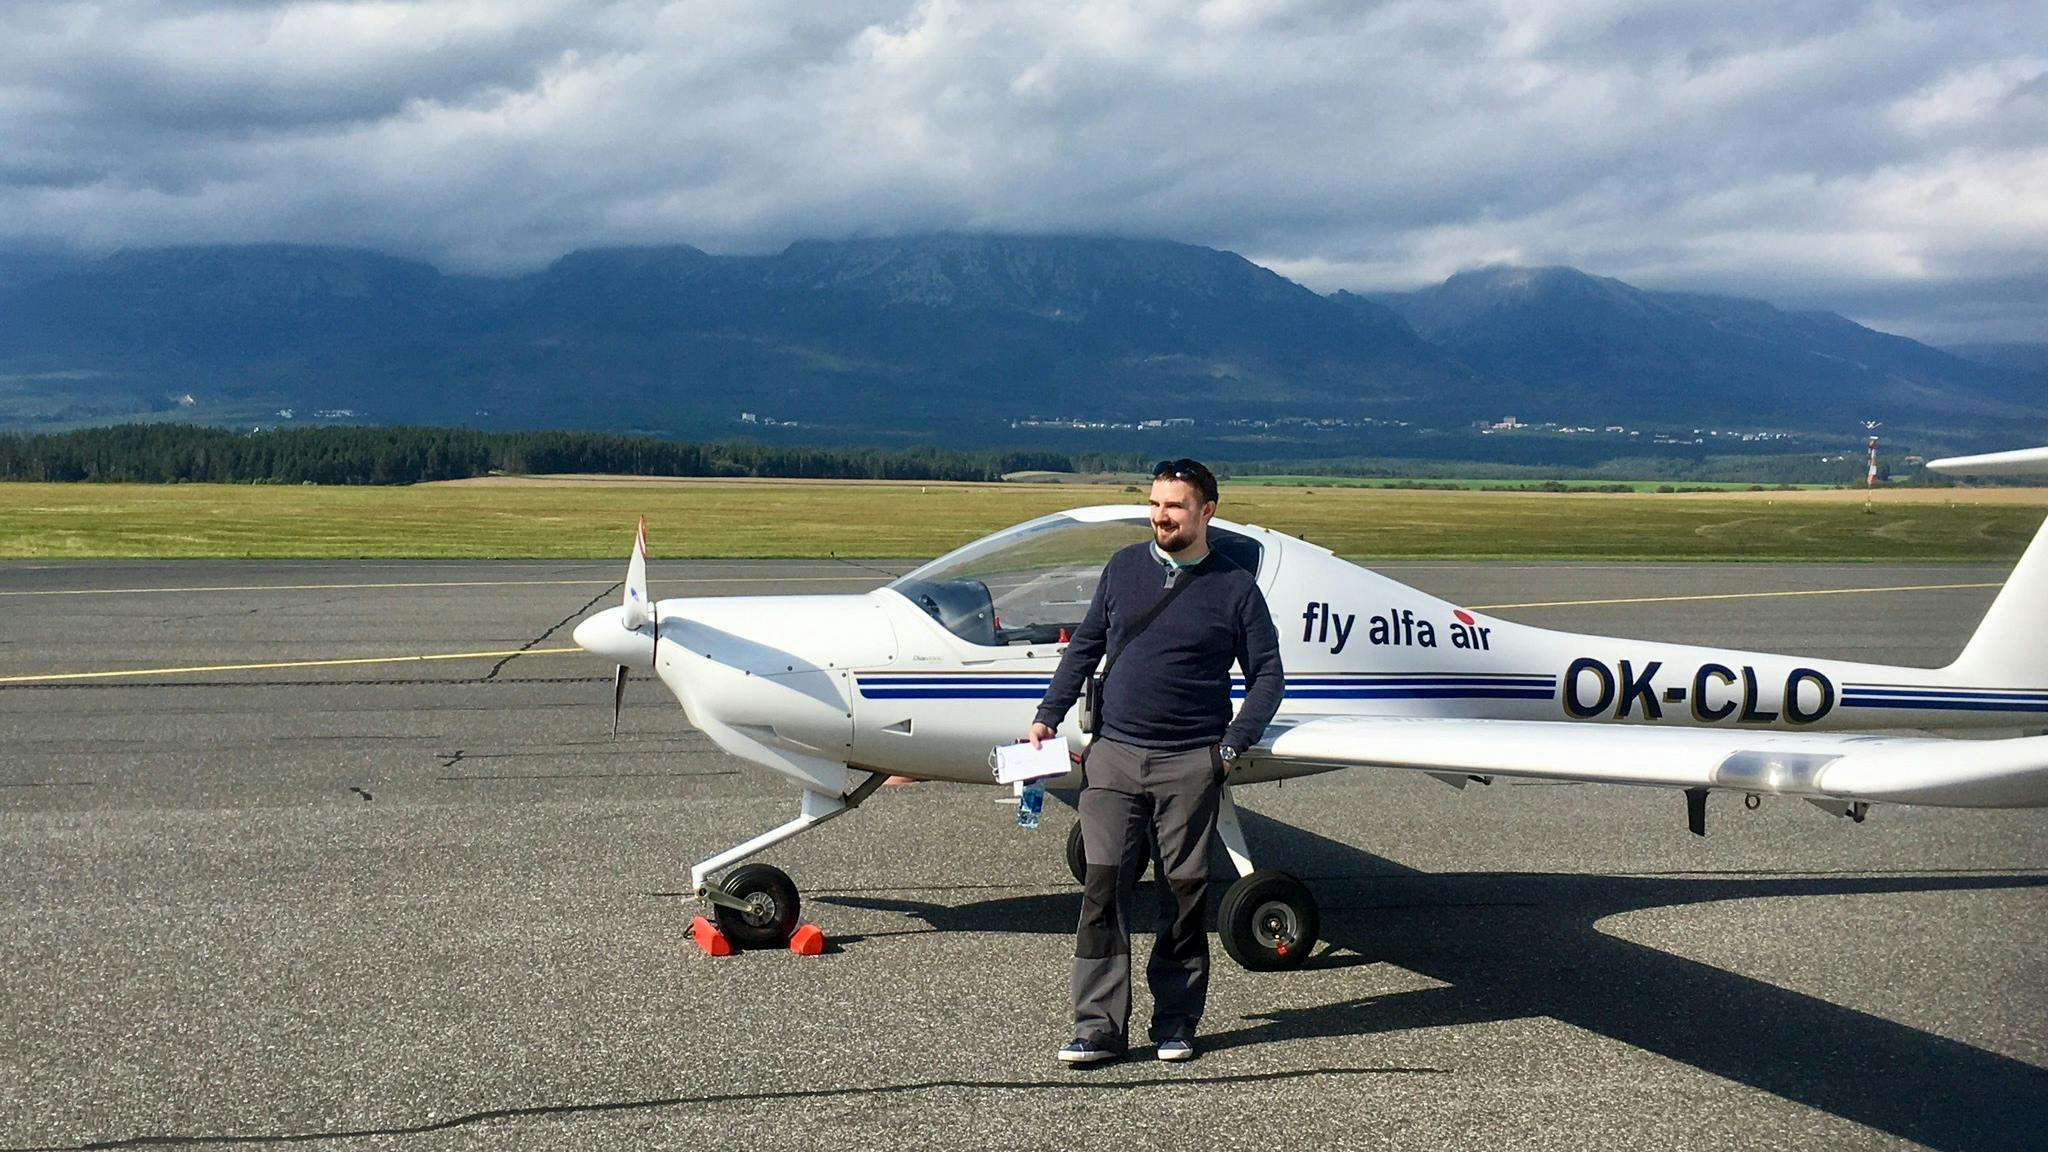 Jan Raska and his way of relaxing - flying a small plane